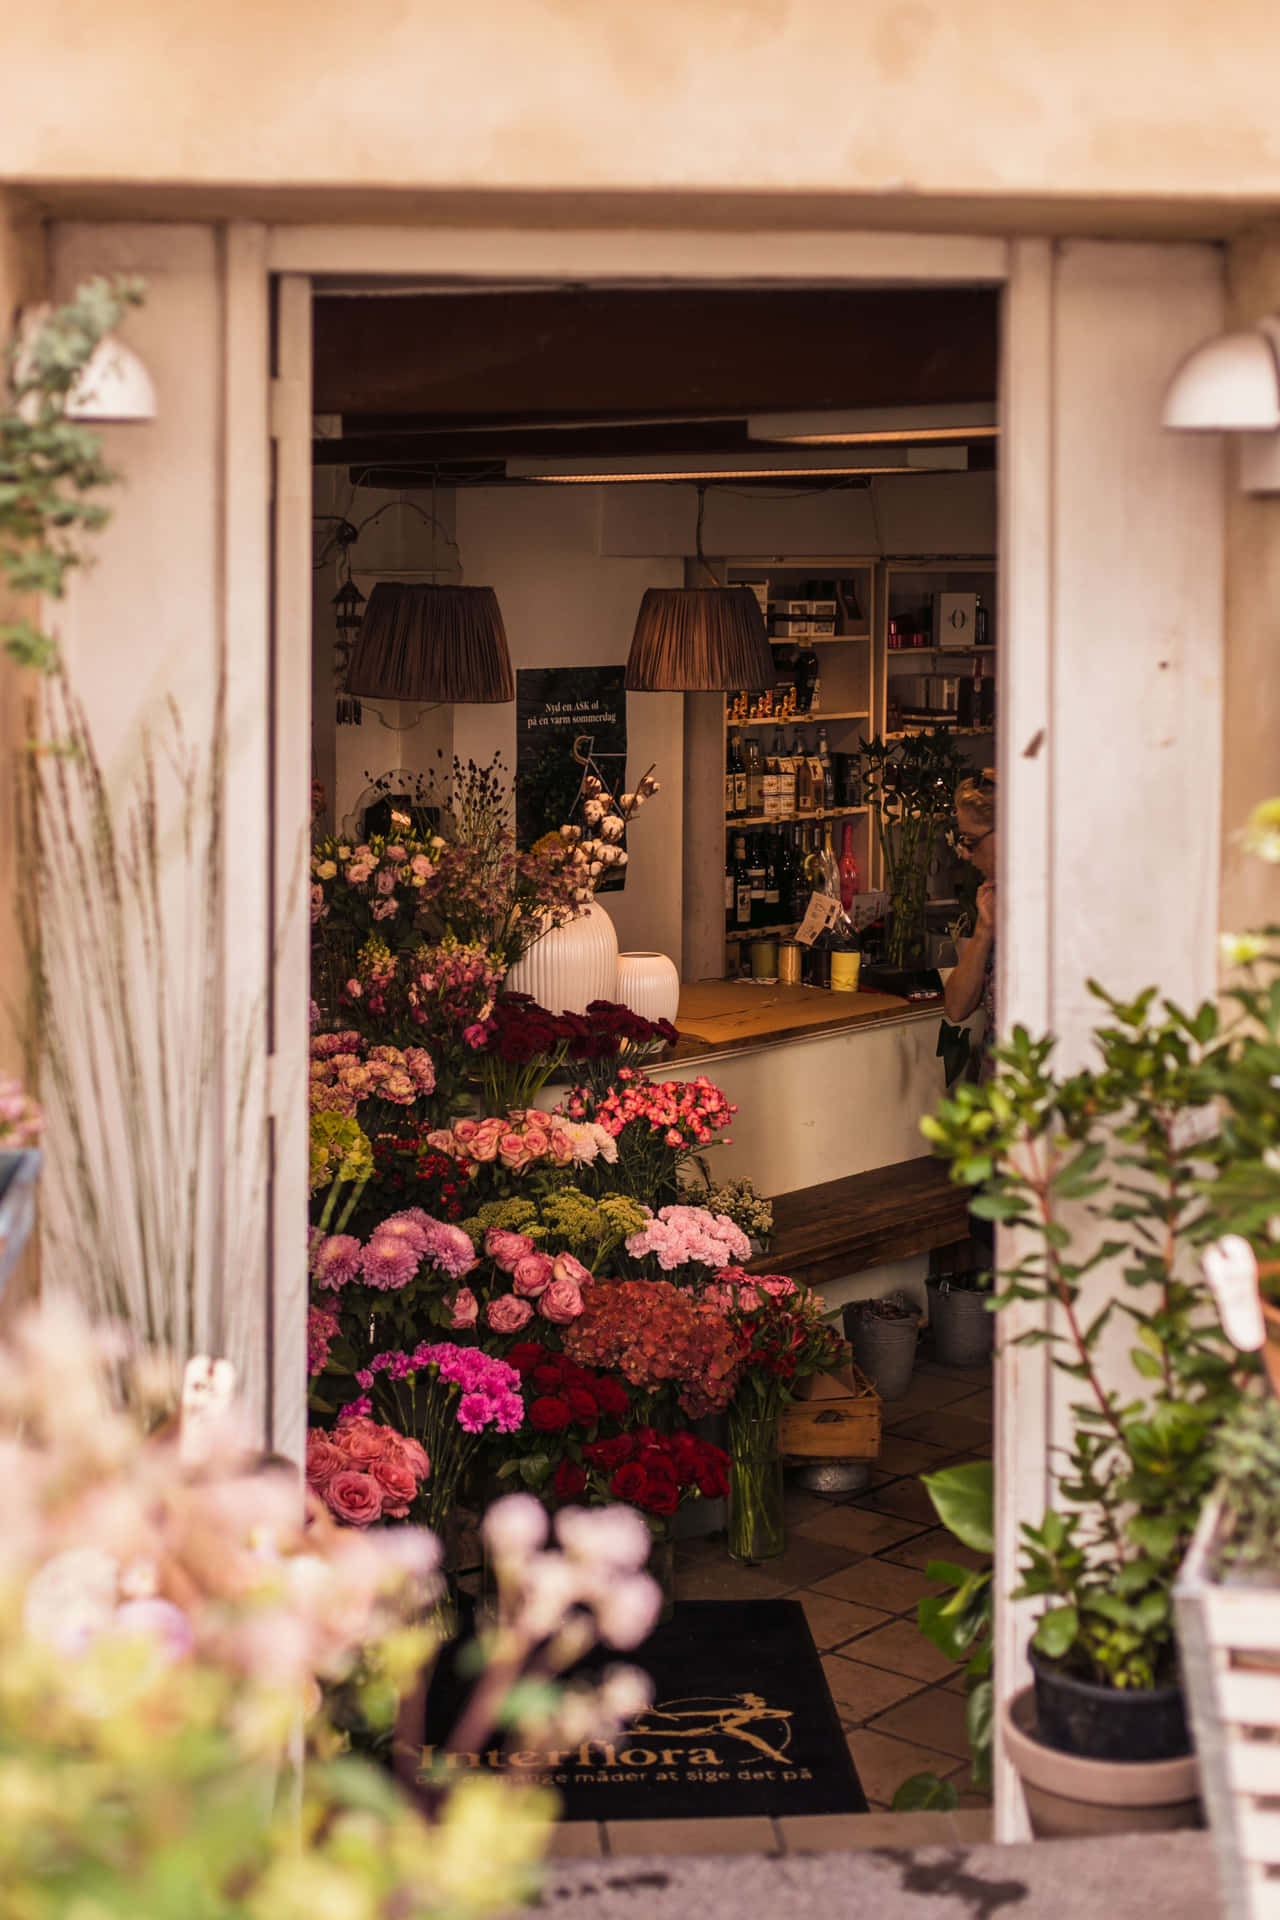 Blooming flower shop with a colorful bouquet display Wallpaper